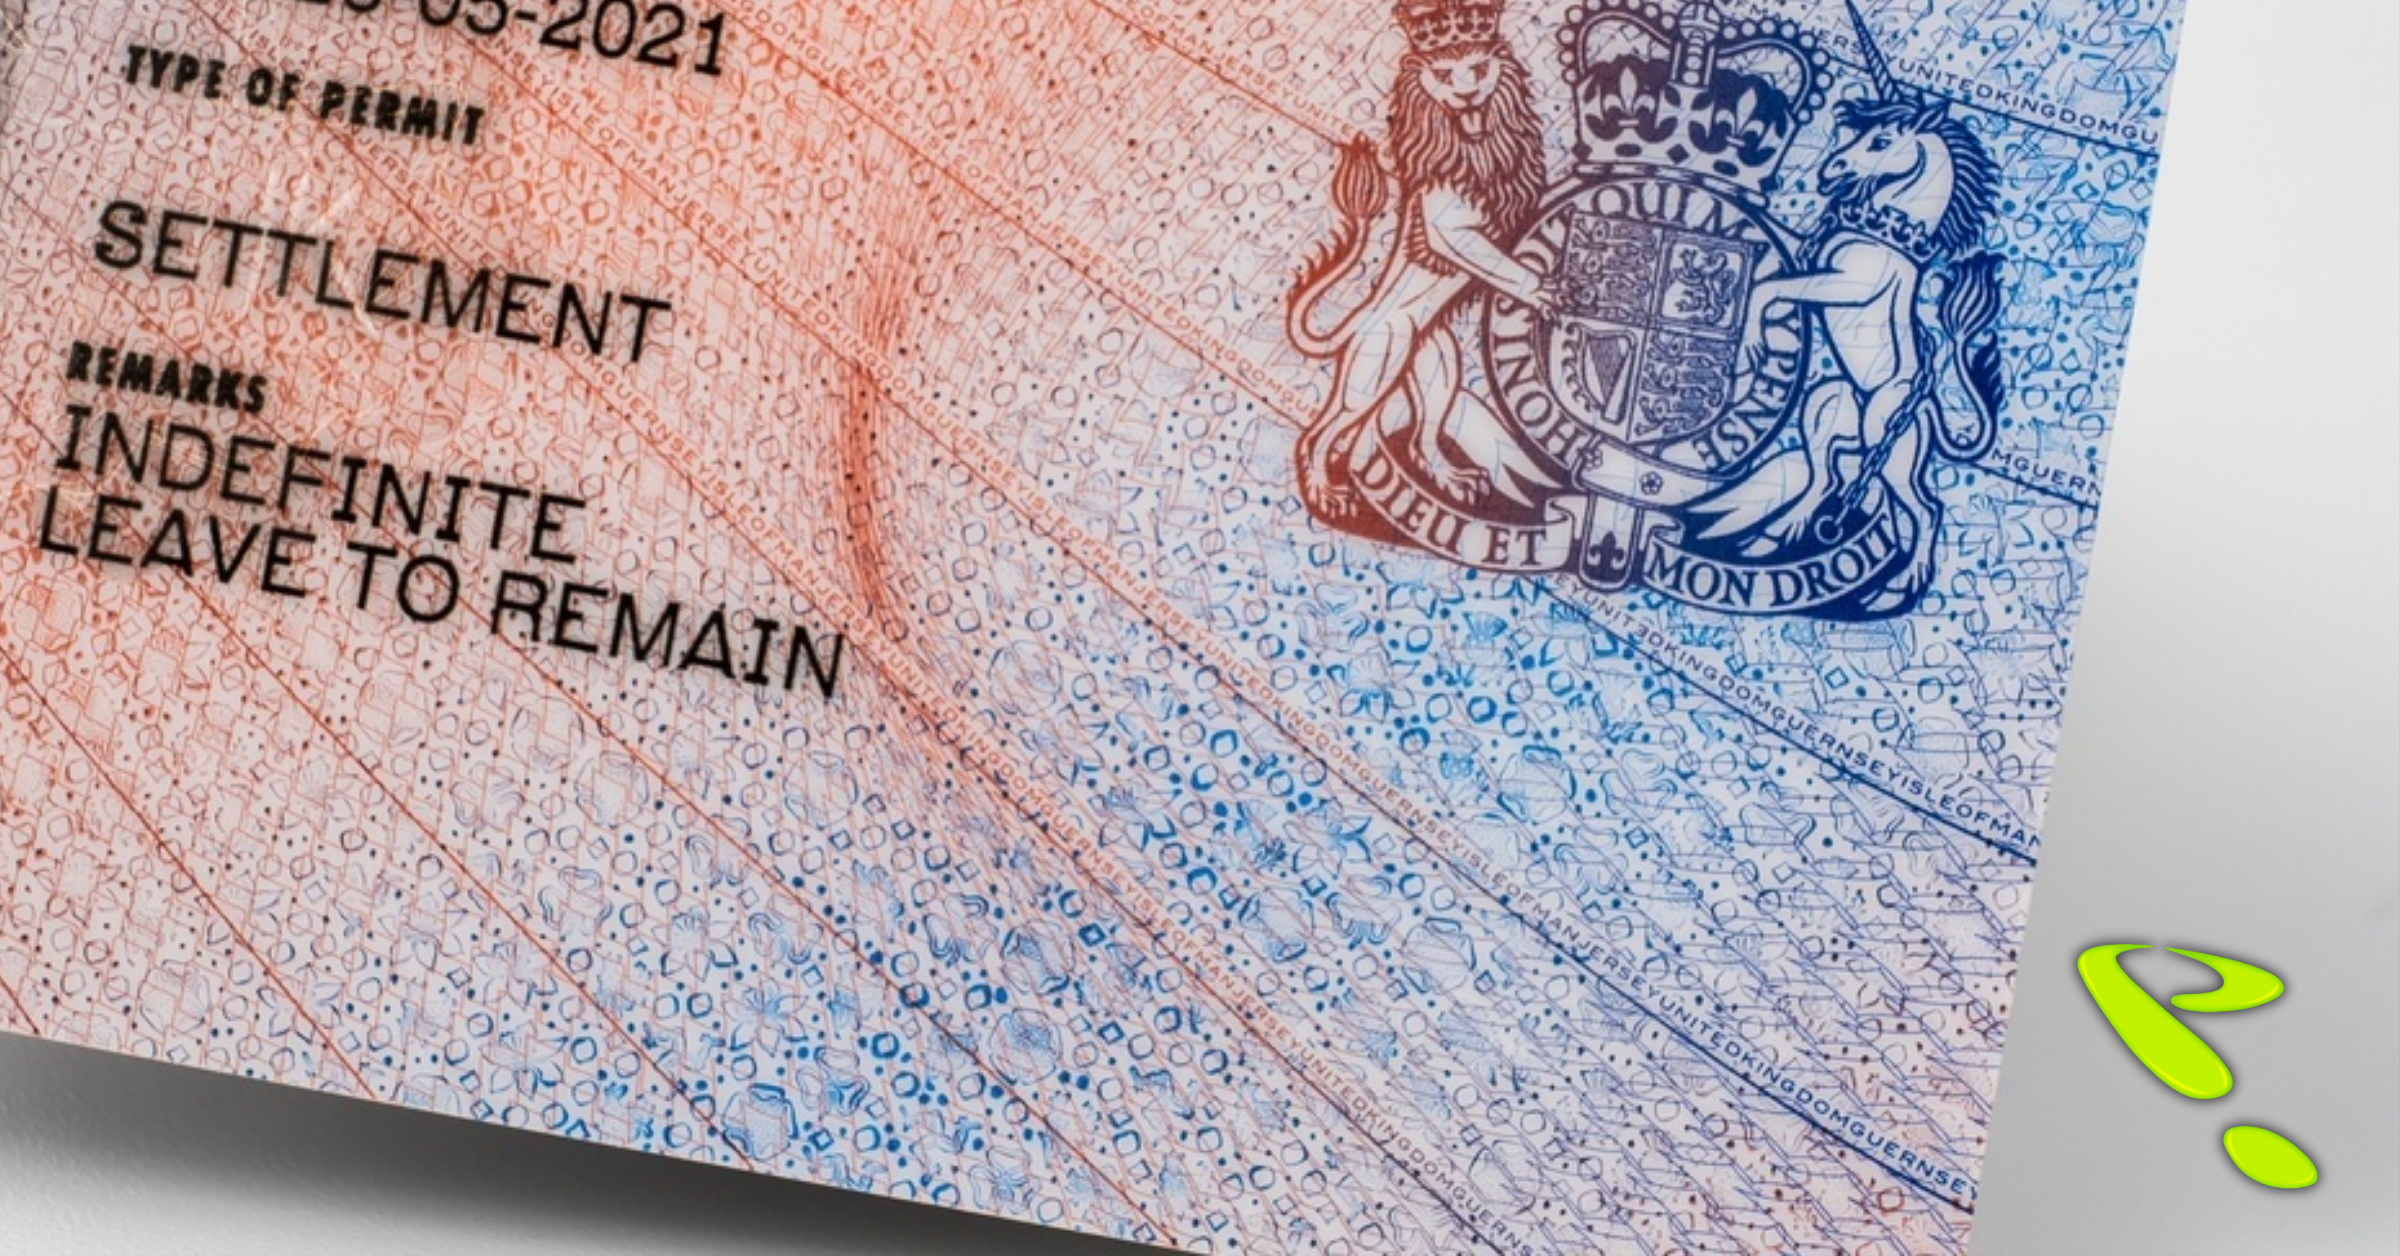 10 Year Long Residence - Indefinite Leave to Remain (ILR) Applications